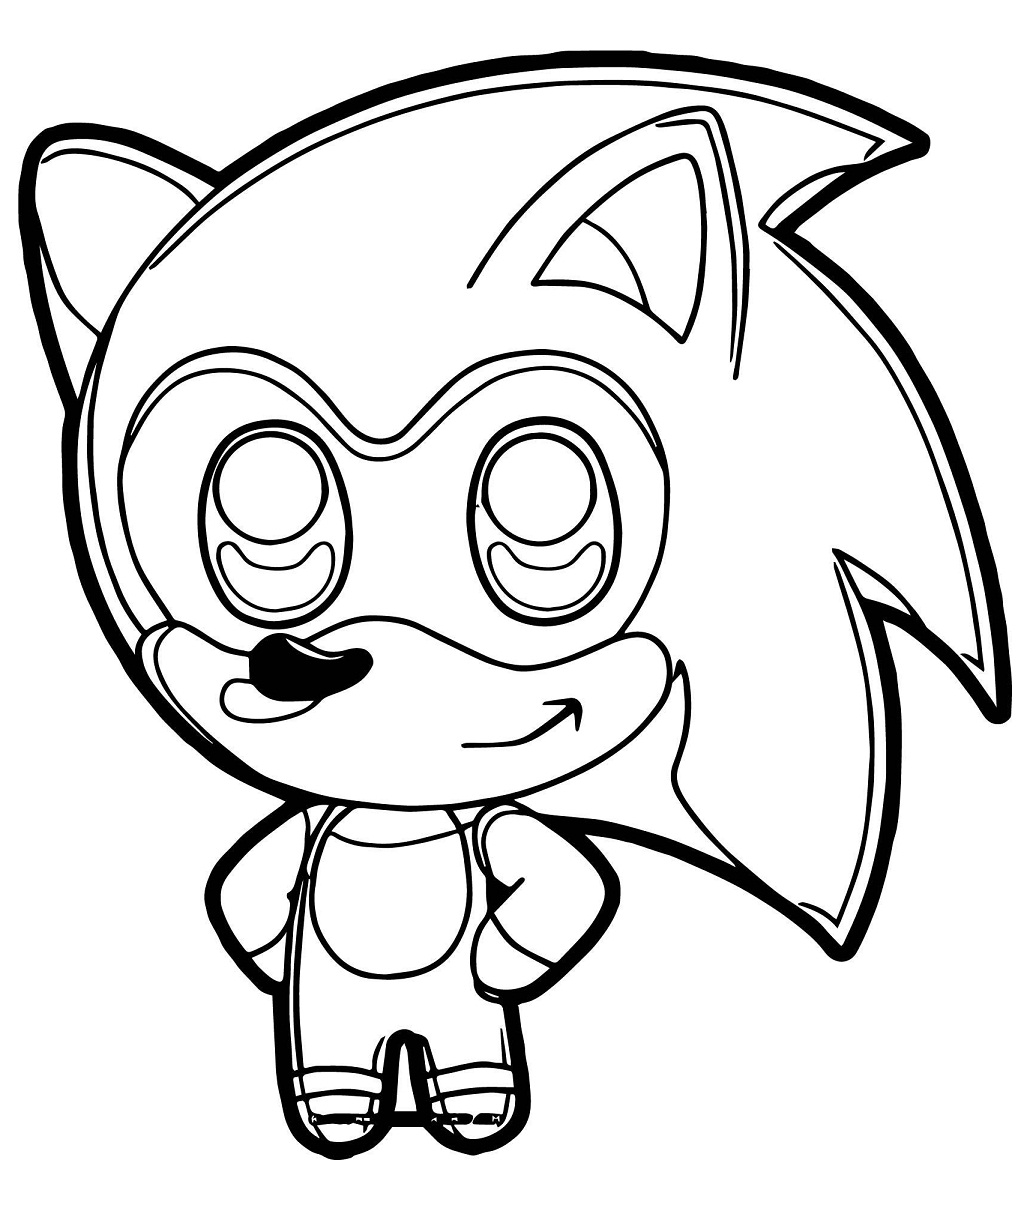 Sonic Coloring Pages Free Printable Coloring Pages for Kids